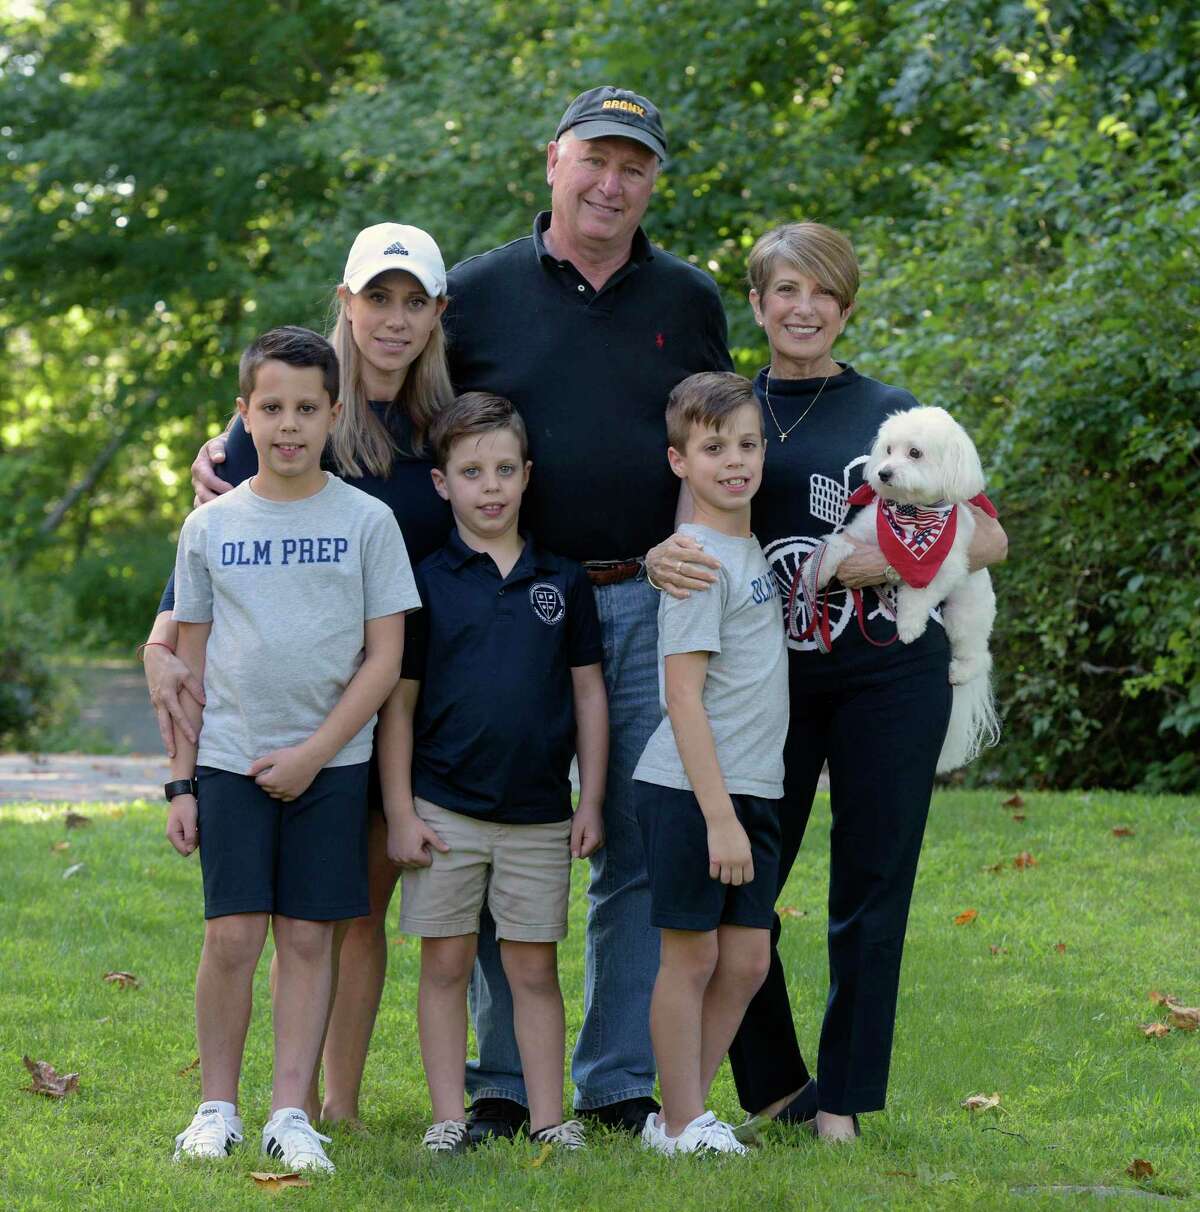 Robert Hofmiller, center, of Guilford, and his family, including wife Rosemary, right, and daughter Jacqueline Ciocca, left, of Madison. Hofmiller lost his sister Judith Hofmiller, of Brookfield, in the twin towers on 9/11. With them are his grandsons Luke Ciocca, left, 10, Peter Ciocca, 6, and Jack Ciocca, right, 8.